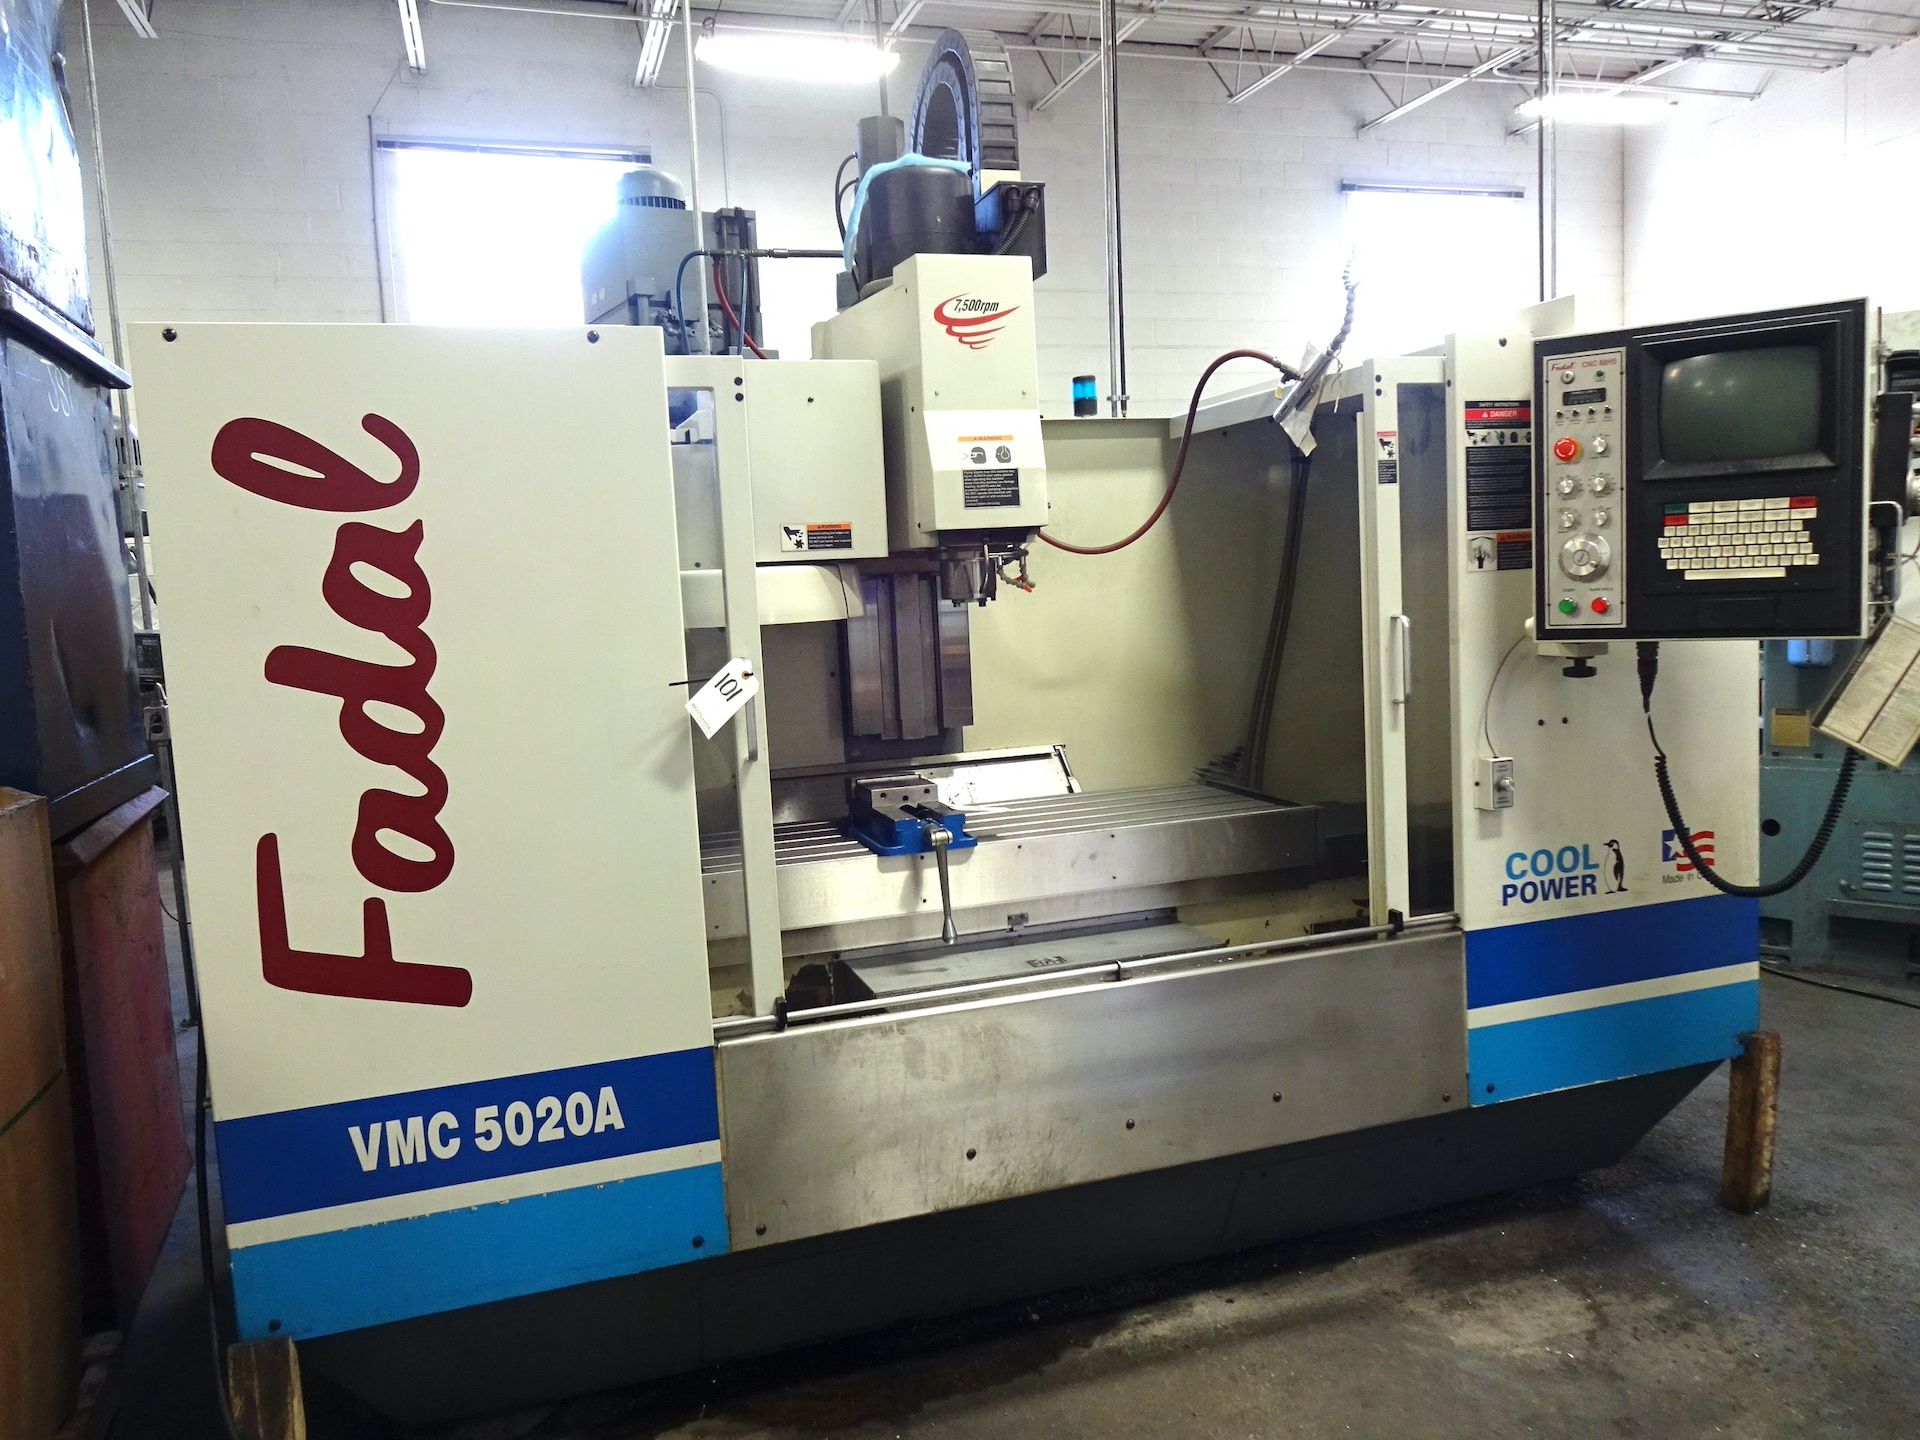 Fadal Model VMC5020A CNC Vertical Machining Center, S/N 9810947 (1998), 7500 RPM Spindle, 21 Station